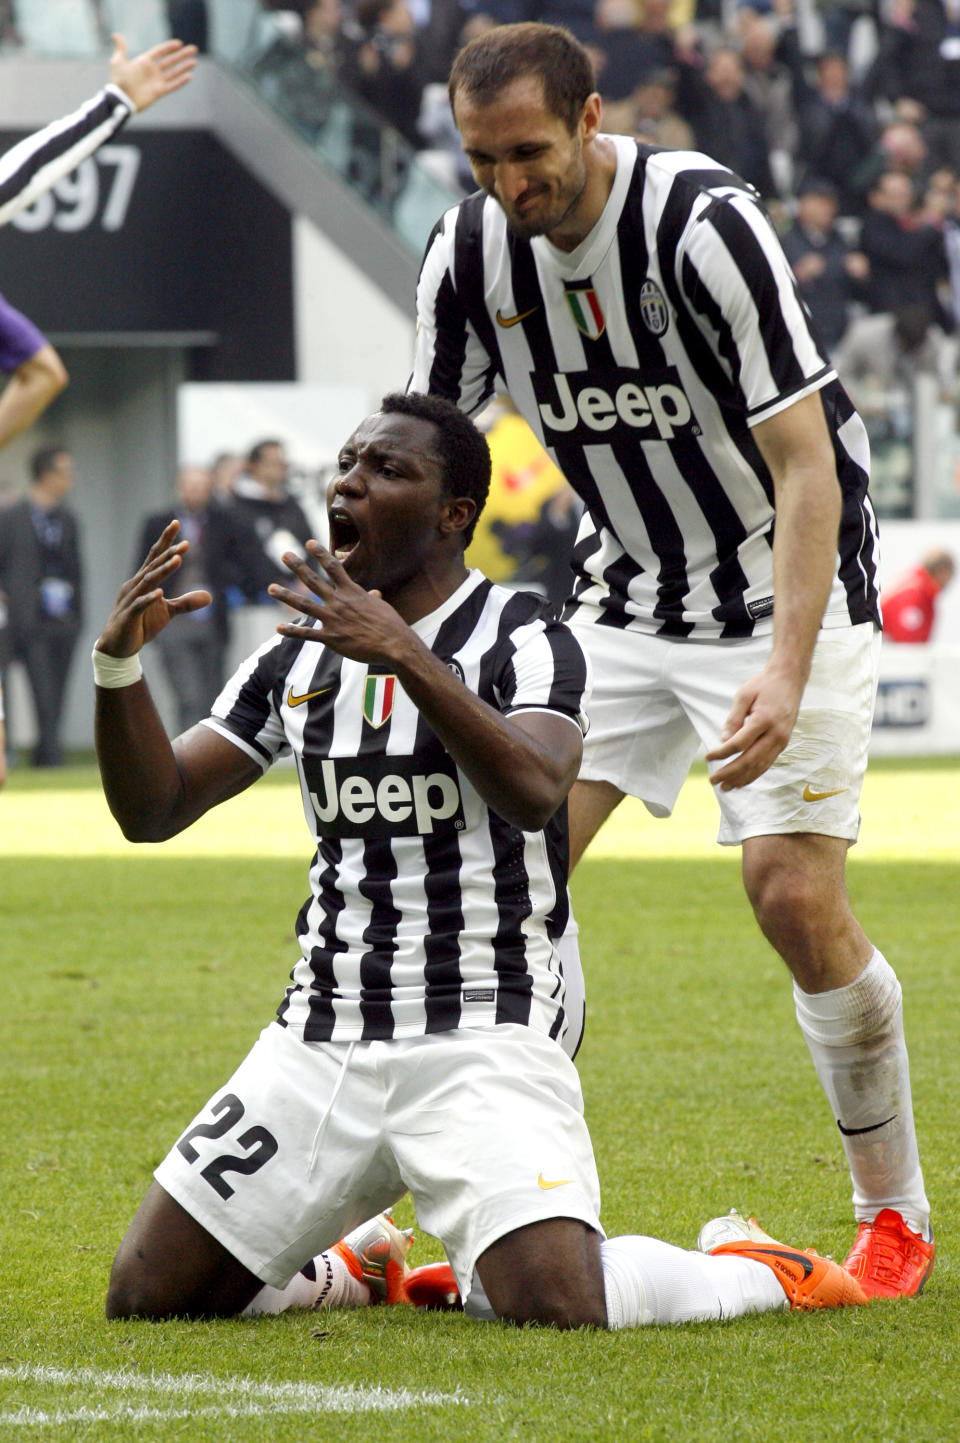 Juventus midfielder Kwadwo Asamoah, of Ghana, celebrates after scoring during a Serie A soccer match between Juventus and Fiorentina at the Juventus stadium, in Turin, Italy, Sunday, March 9, 2014. (AP Photo/Massimo Pinca)